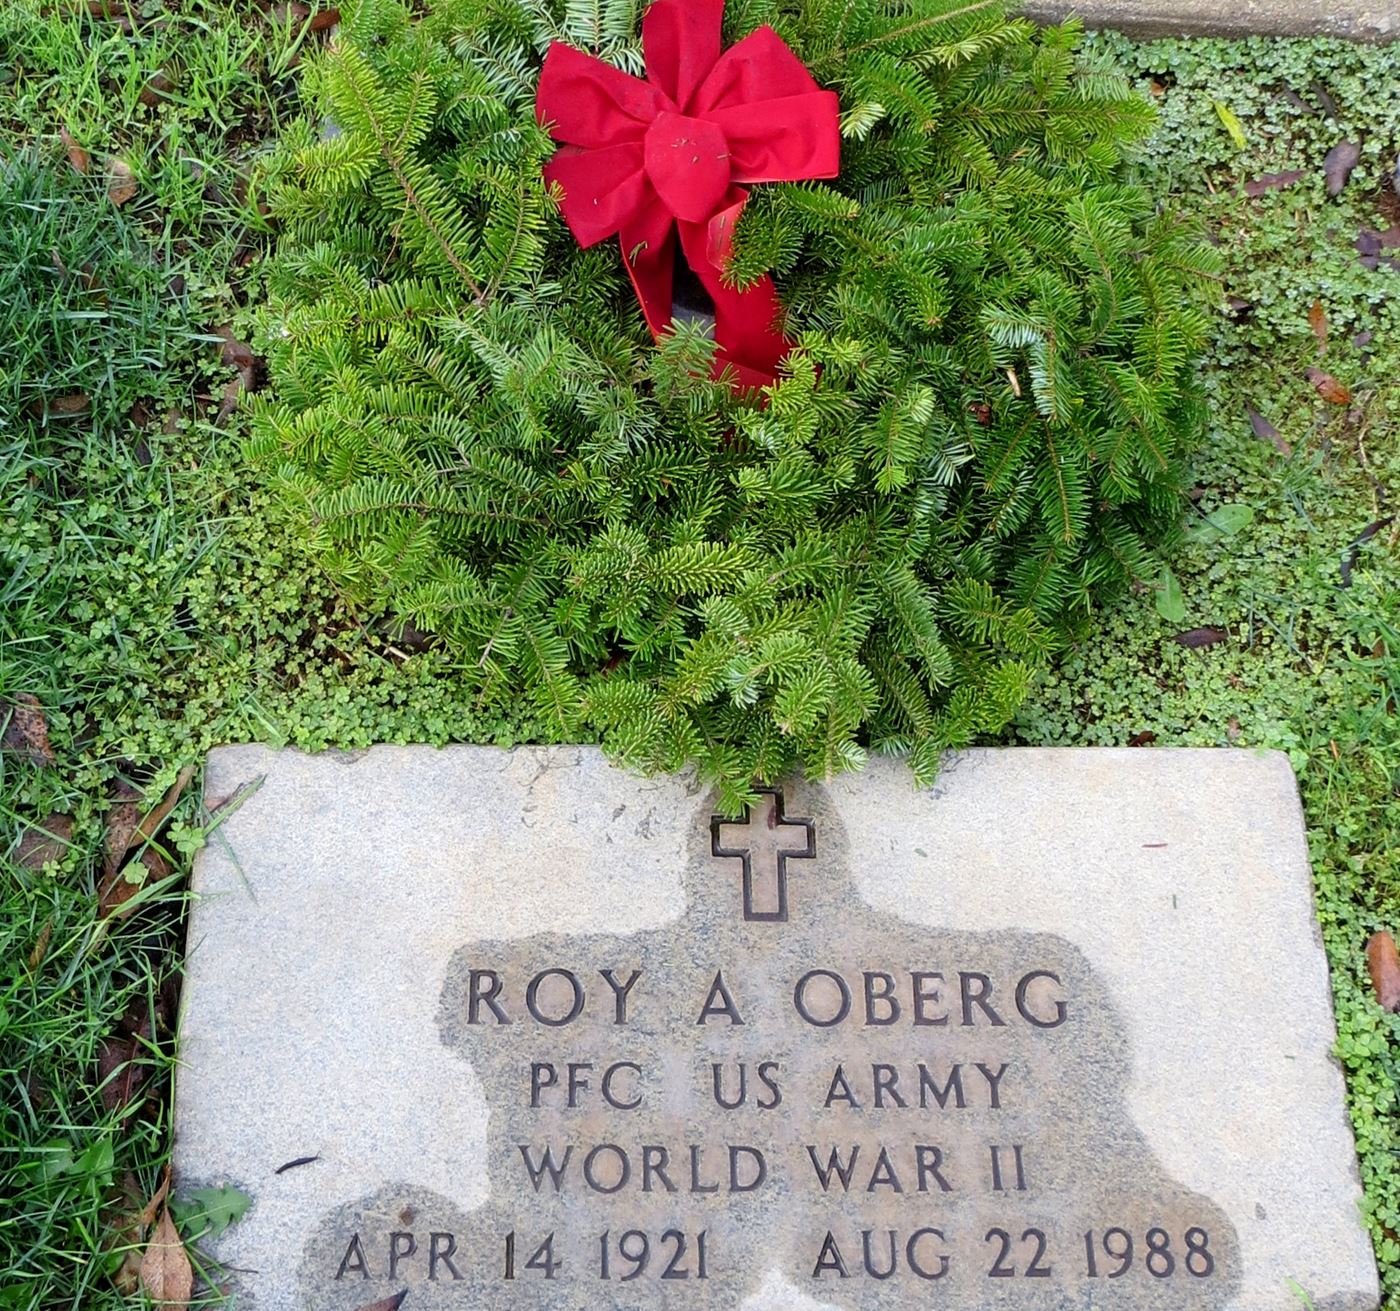 Each year, after the opening dedications, the families are allowed to go place wreaths on the graves of their loved ones first.